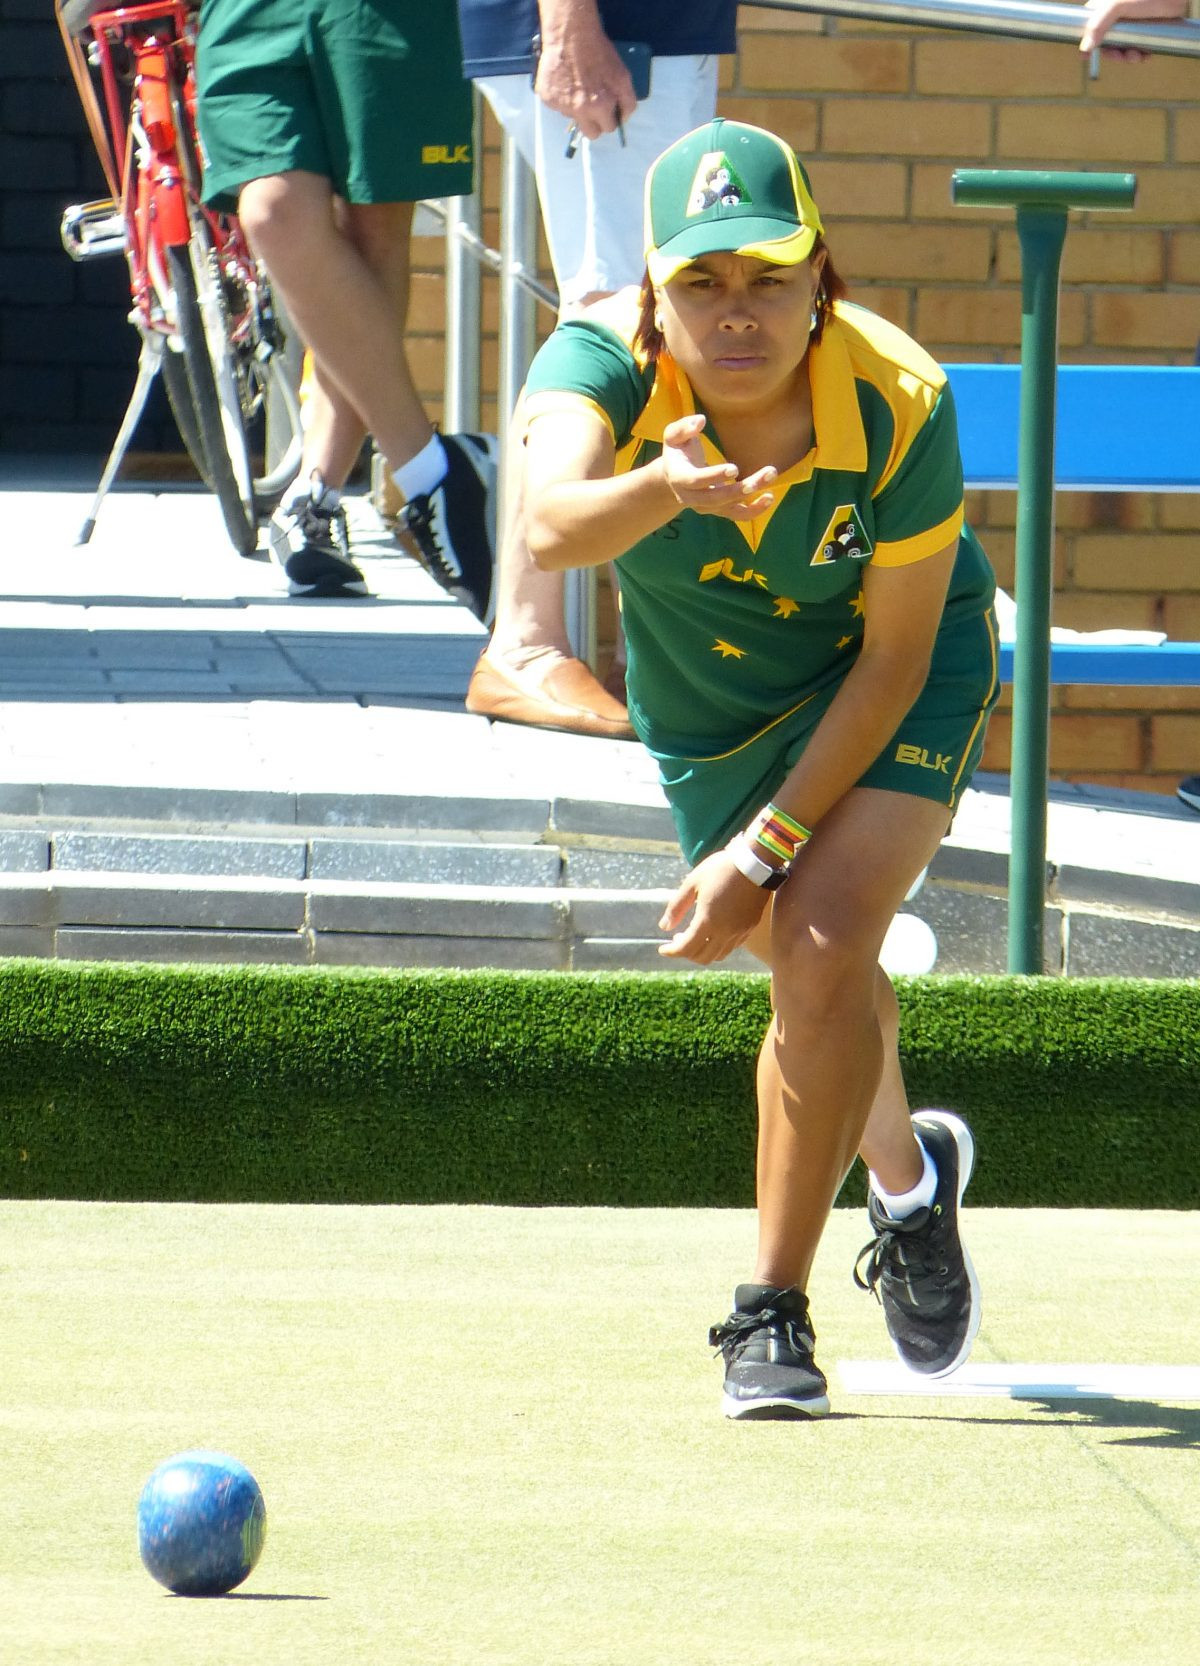 Kylie Whitehead became the first Aboriginal woman to compete at a World Bowls Championship ©World Bowls